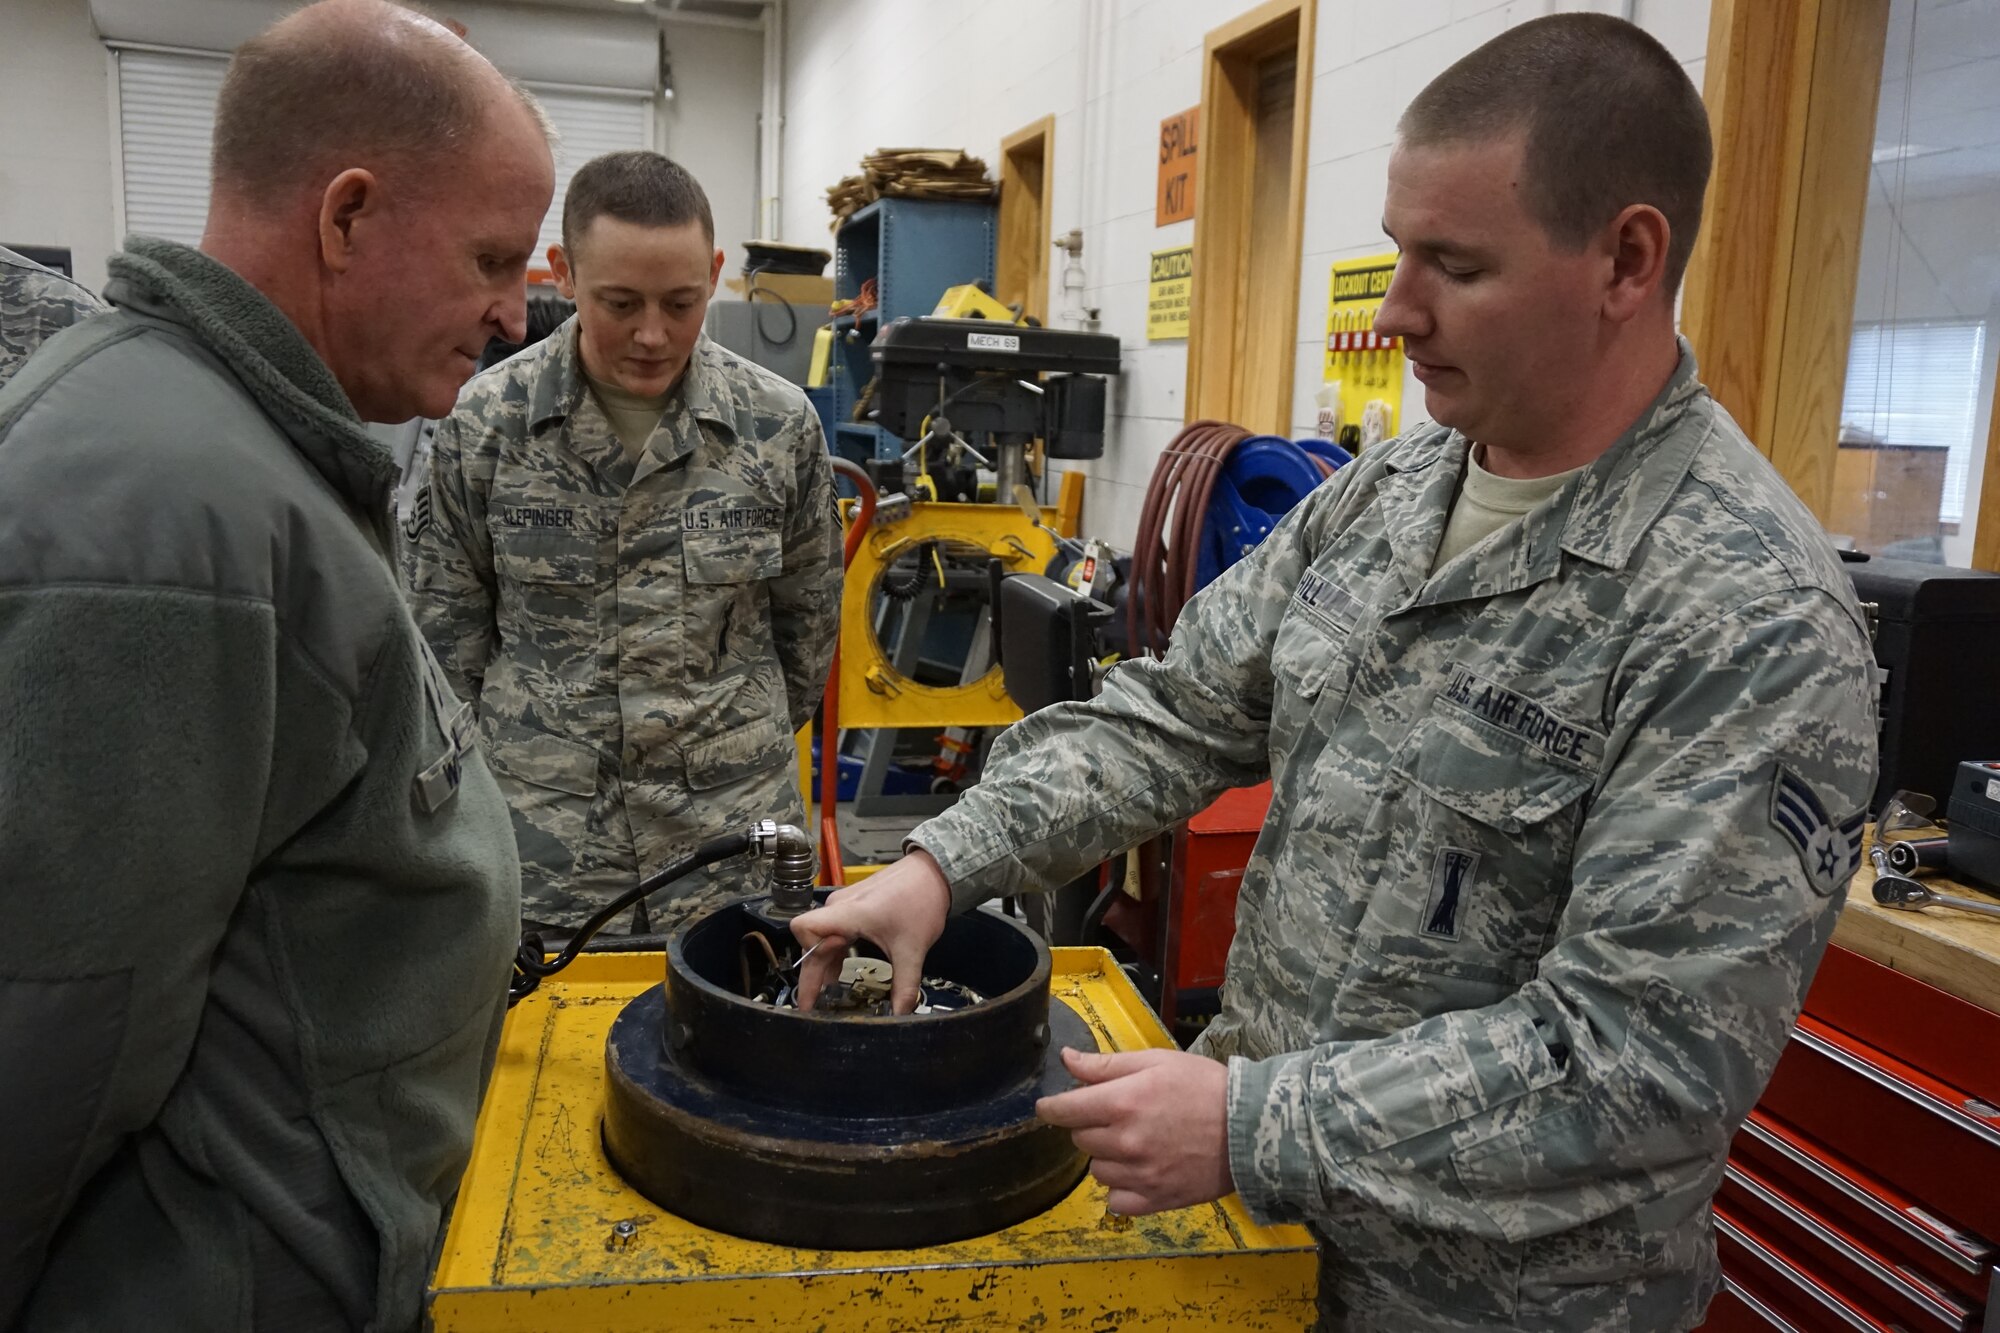 Senior Airman Brandin Hill, 90th Maintenance Operations Squadron, shows a security pit vault door to Lt. Gen. Stephen Wilson, Air Force Global Strike Command commander, as Staff Sgt. Dustin Klepinger, 90th Maintenance Operations Squadron, watches, Dec. 10, 2014. Wilson visited the 90th Missile Wing to check on the progress of the Force Improvement Program. (U.S. Air Force photo/Lan Kim)